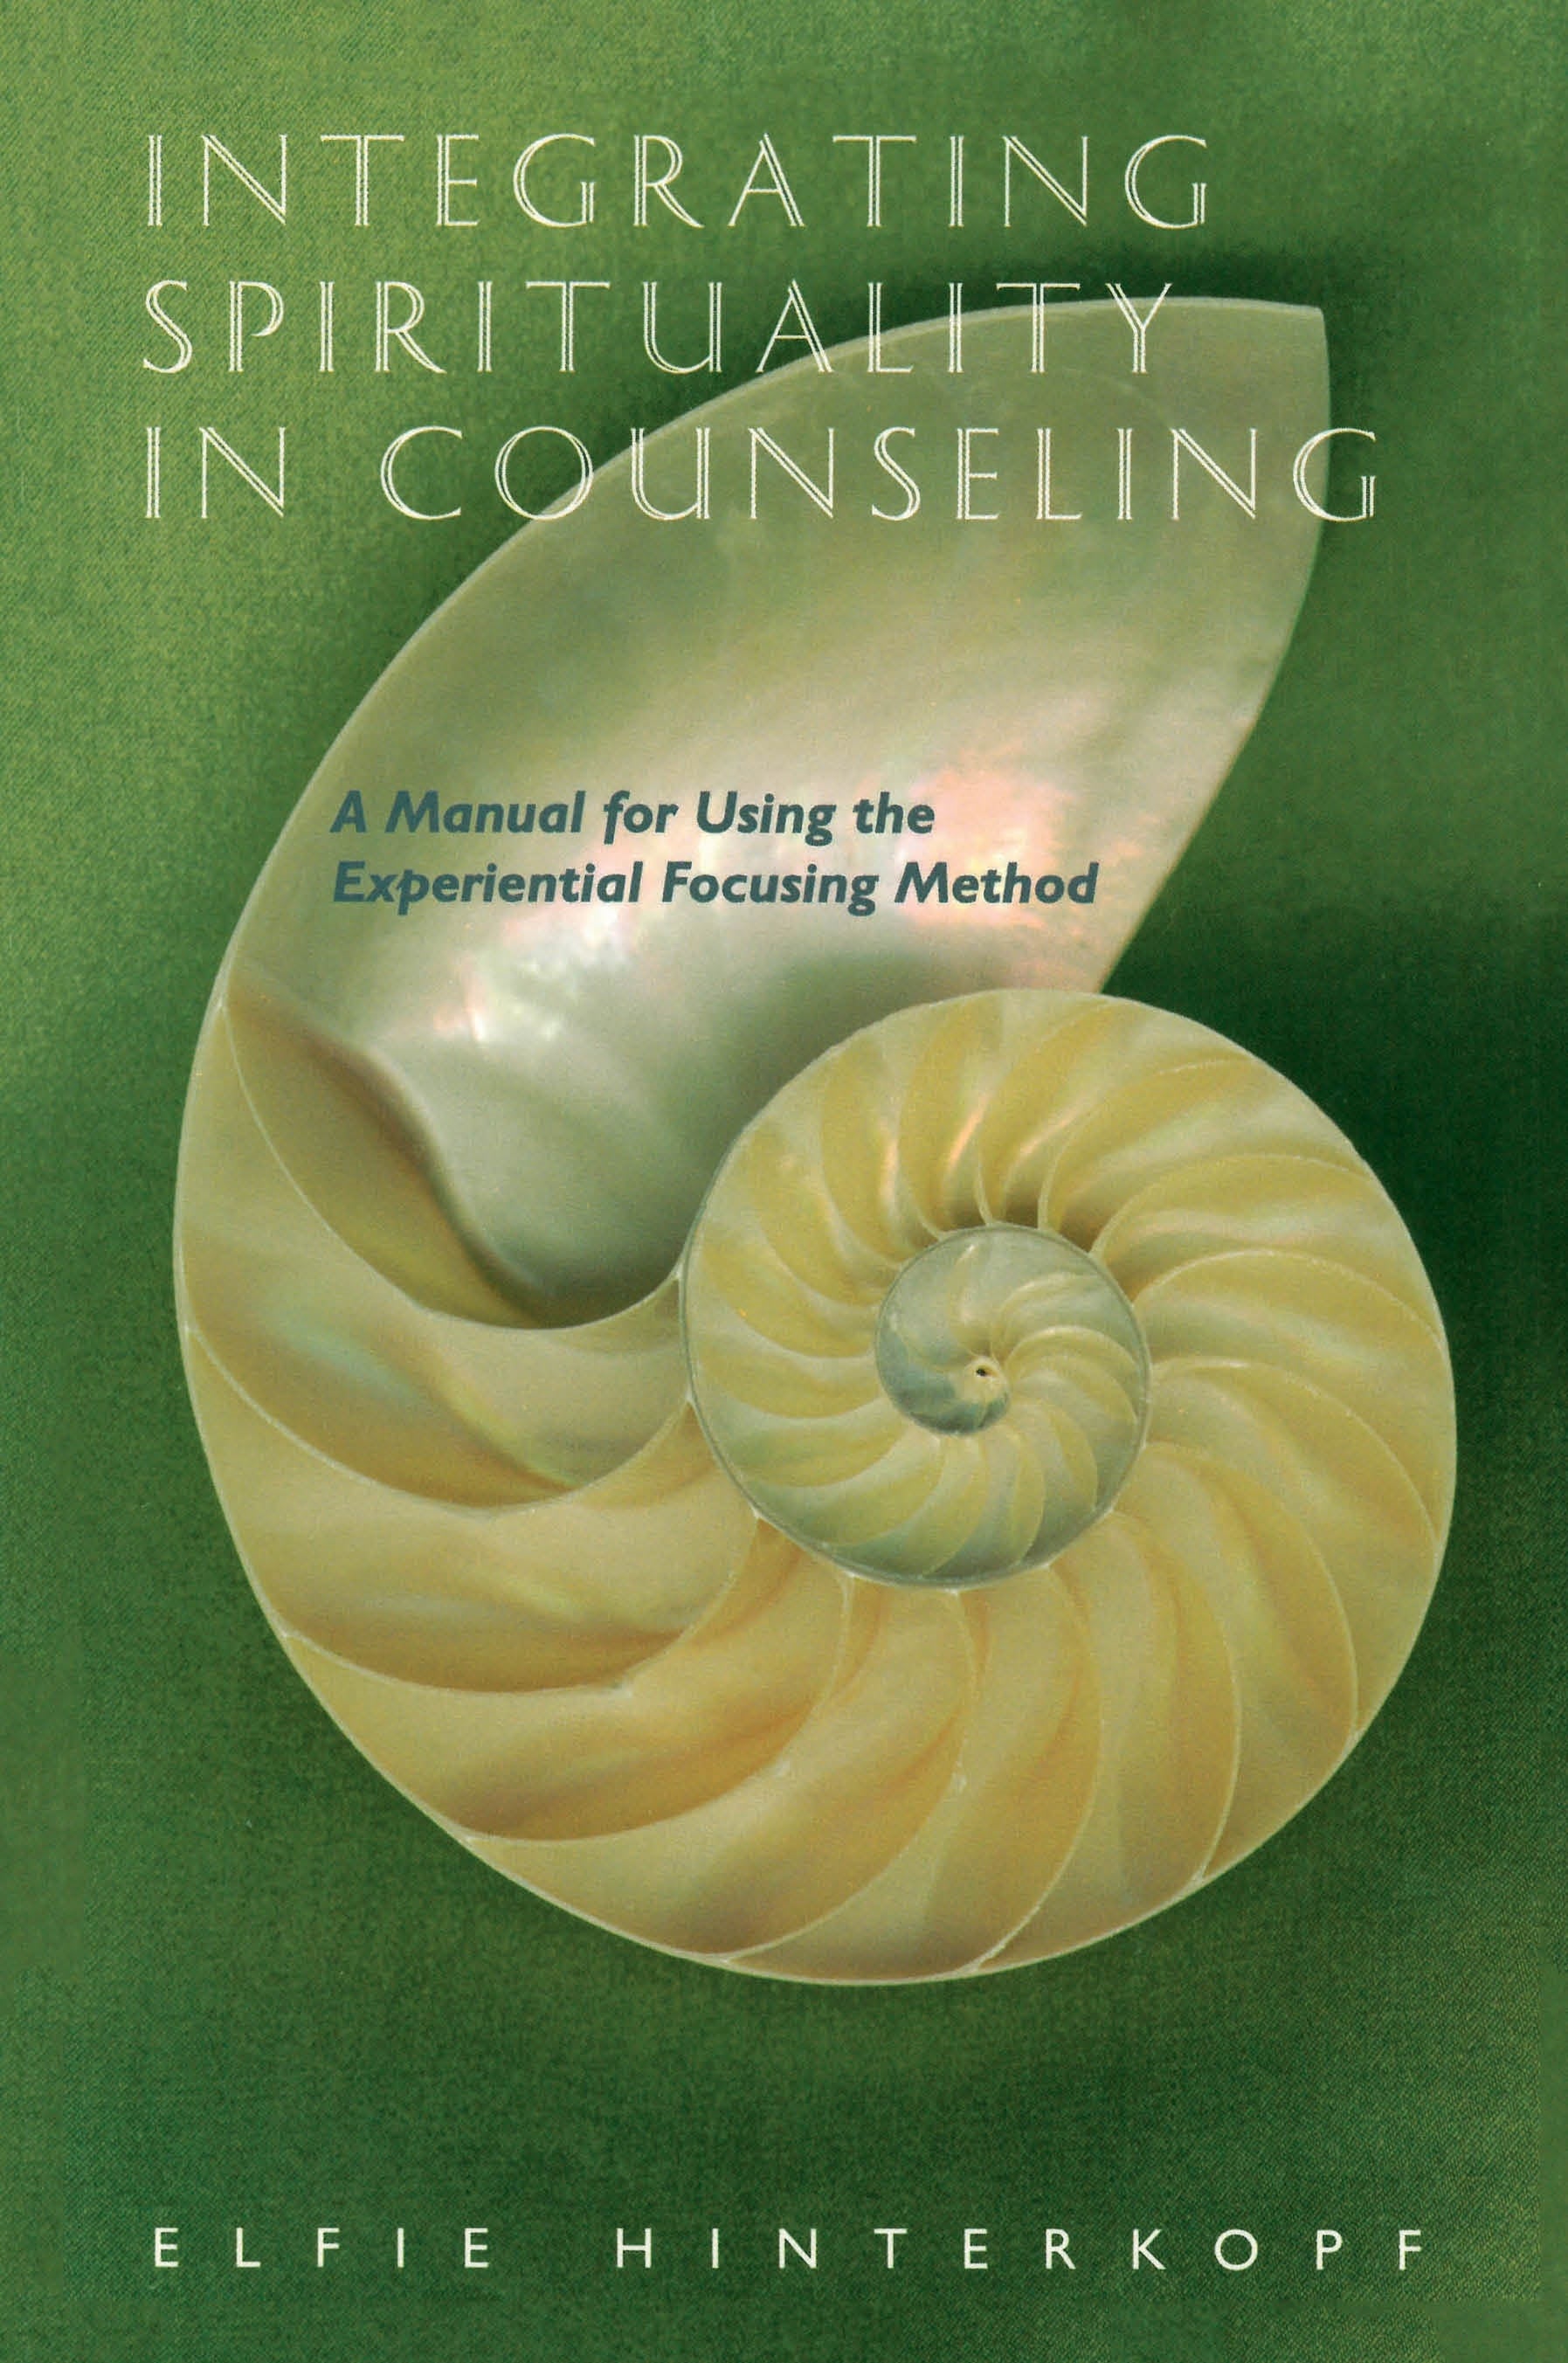 Integrating Spirituality in Counseling by Elfie Hinterkopf